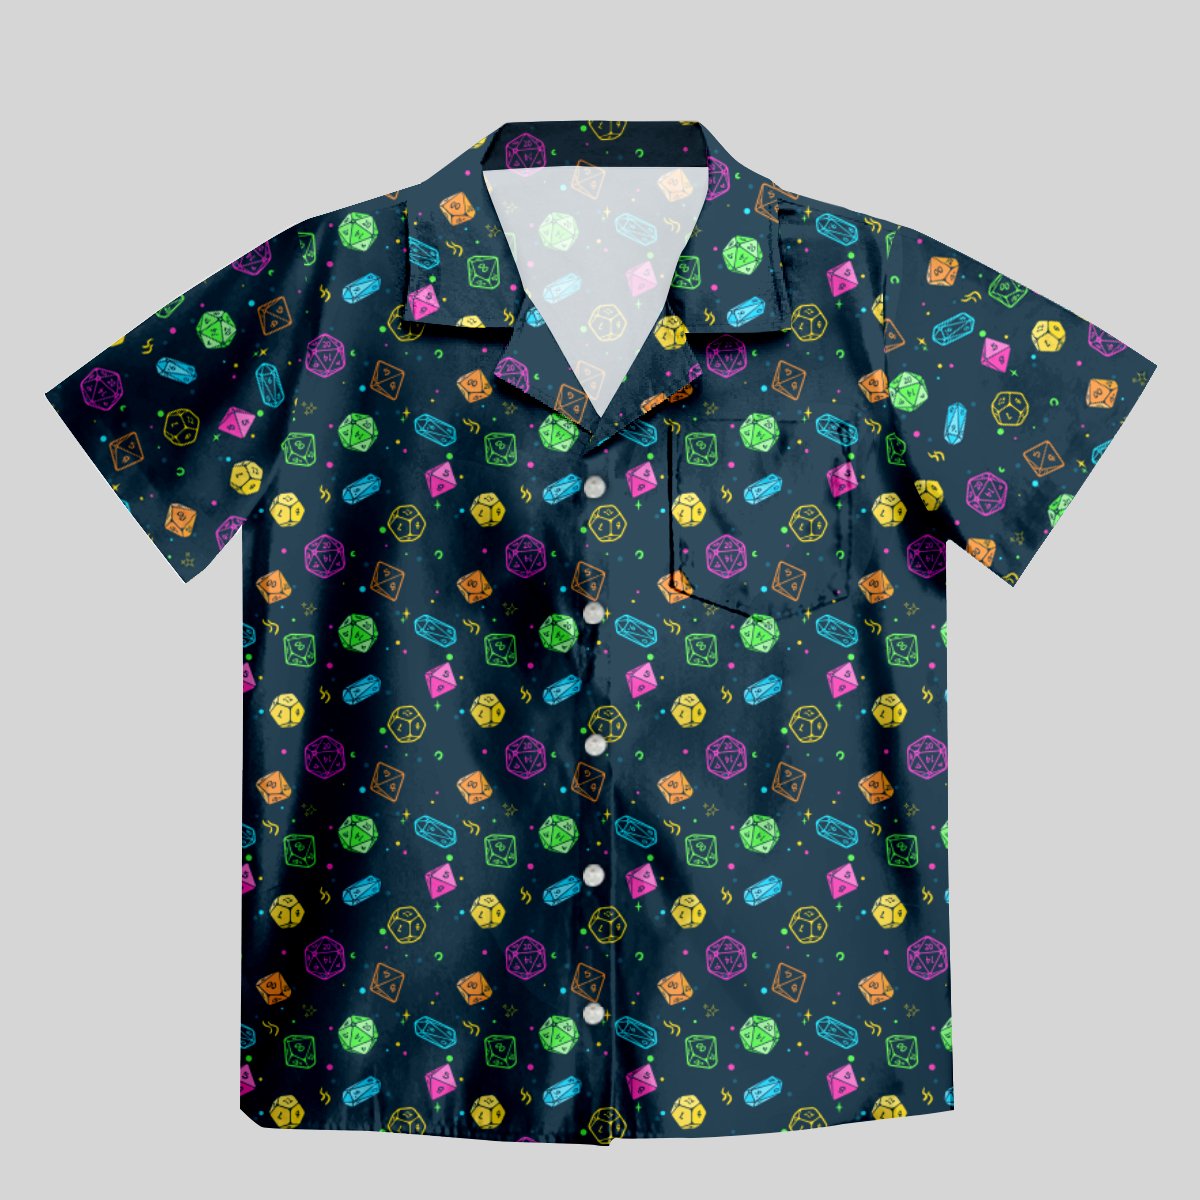 Colorful DND Dice RPG Button Up Pocket Shirt - Geeksoutfit